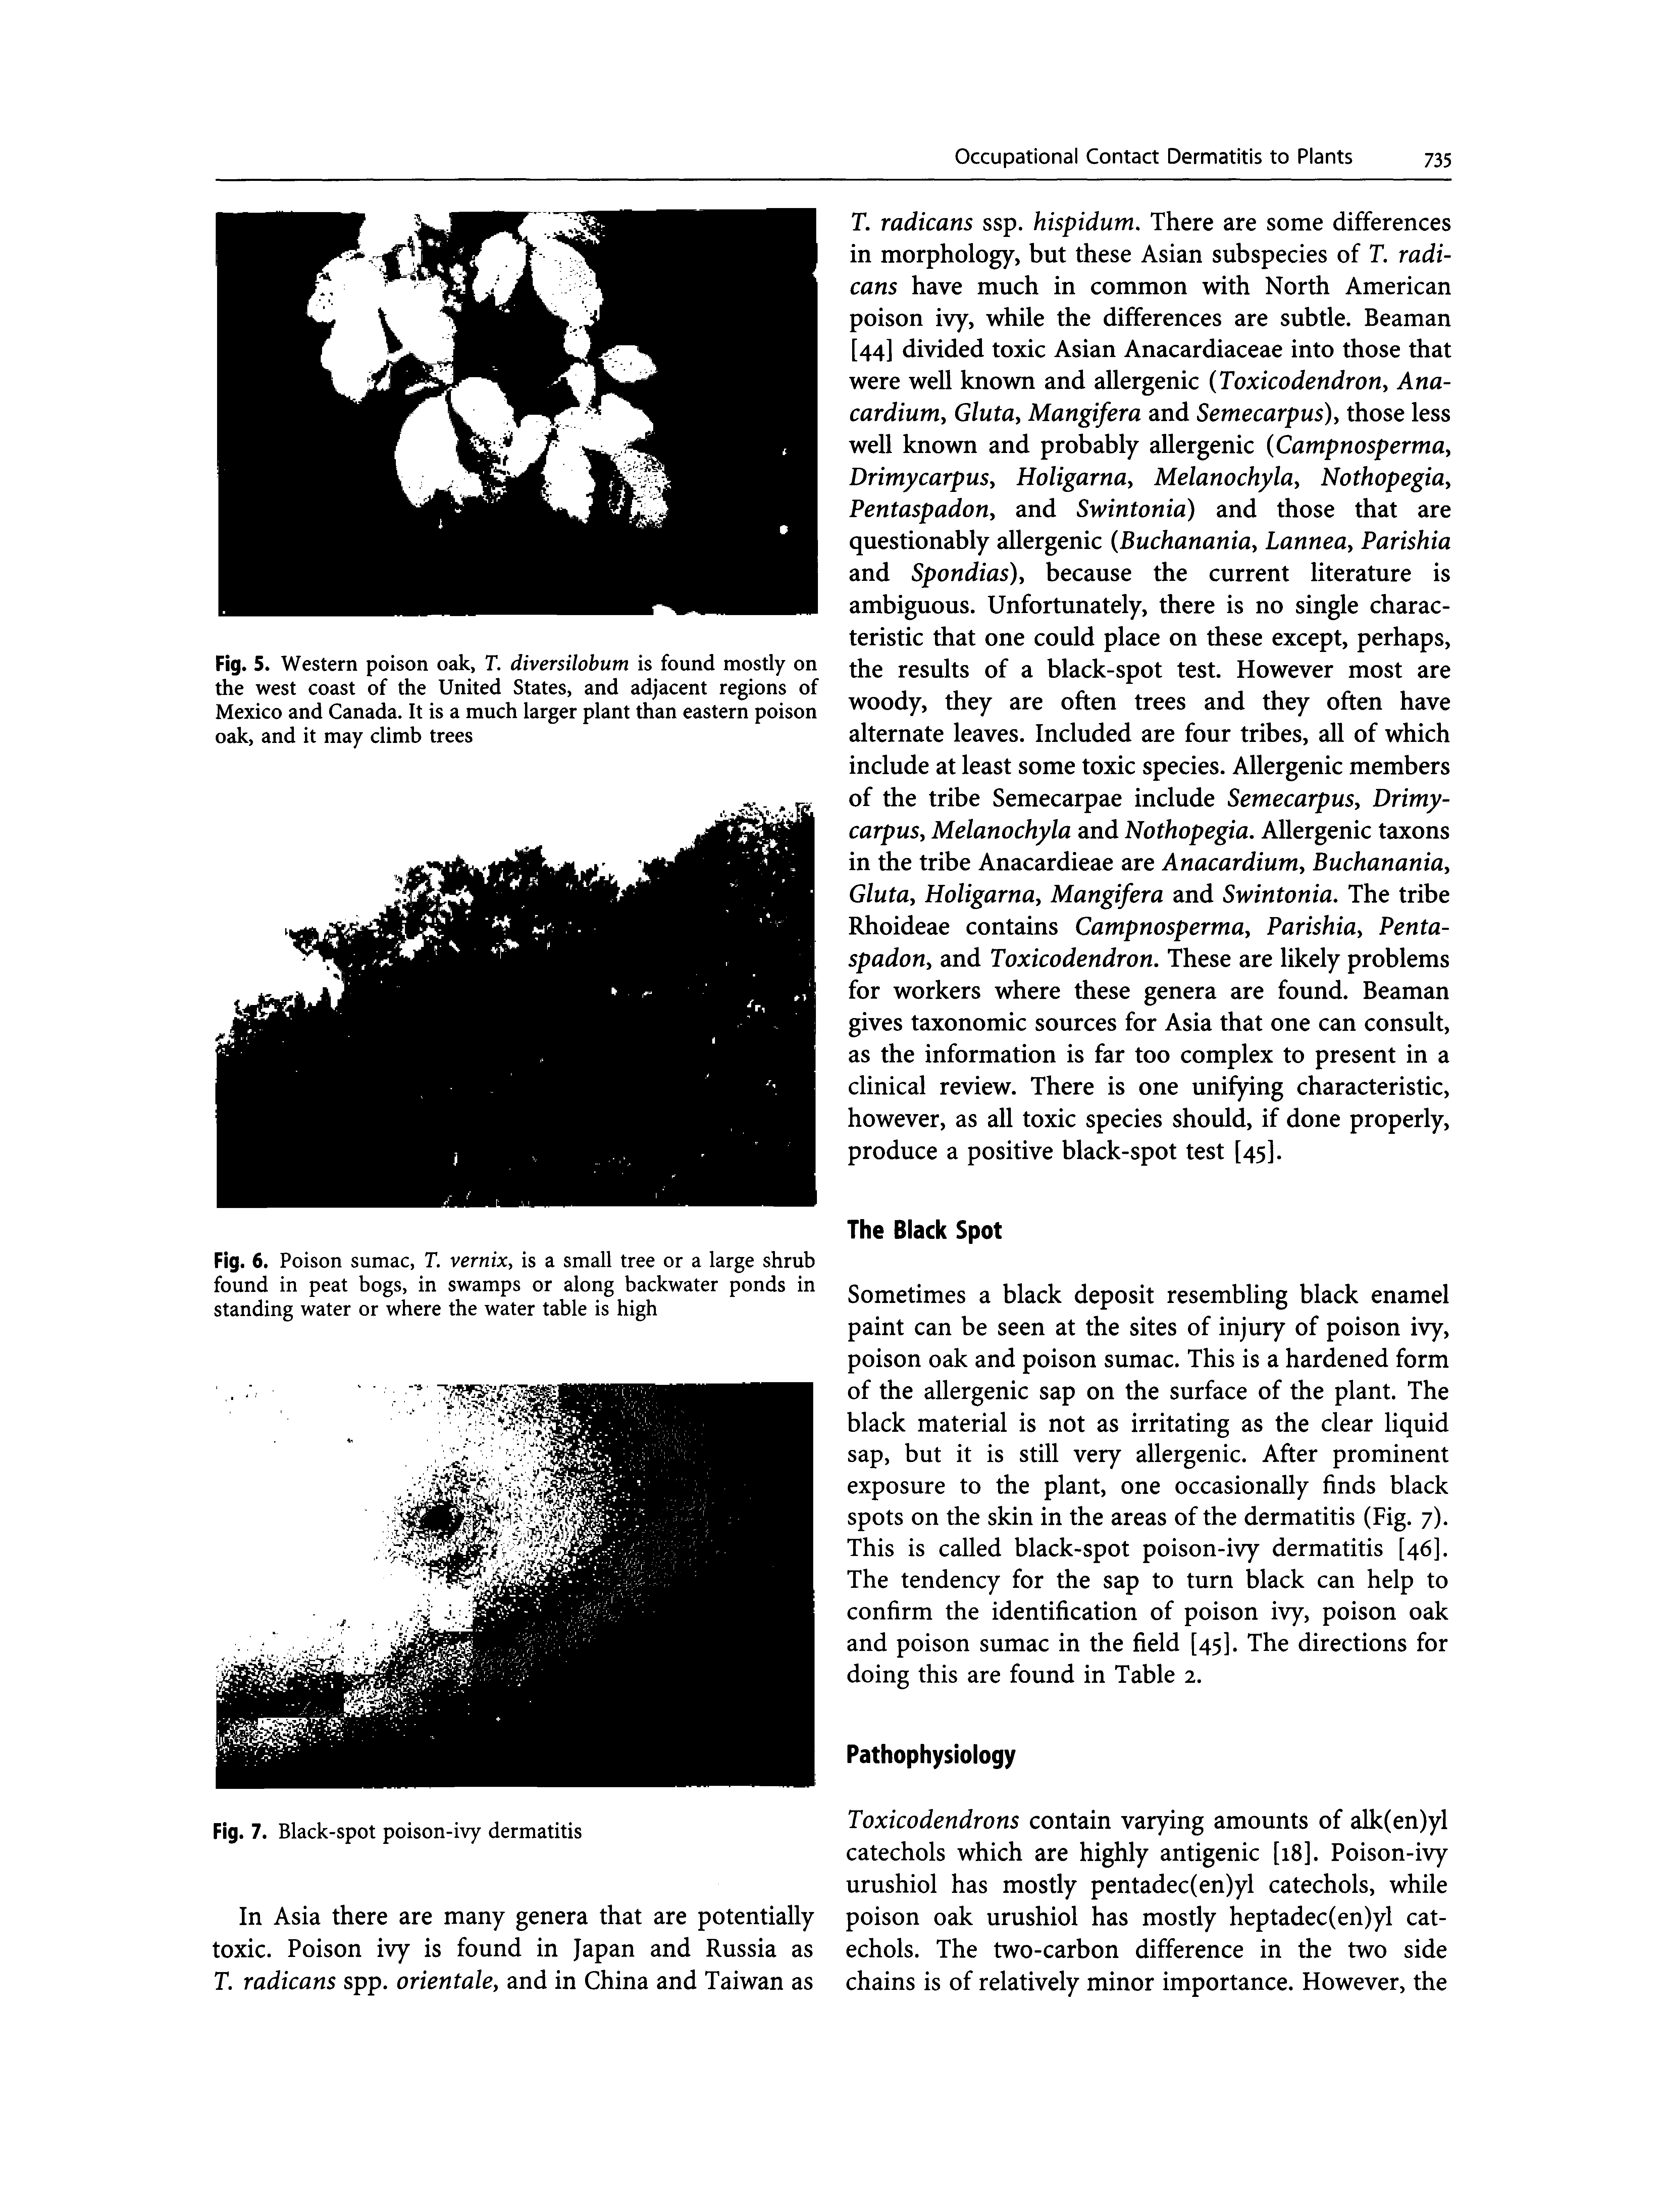 Fig. 6. Poison sumac, T. vernix, is a small tree or a large shrub found in peat bogs, in swamps or along backwater ponds in standing water or where the water table is high...